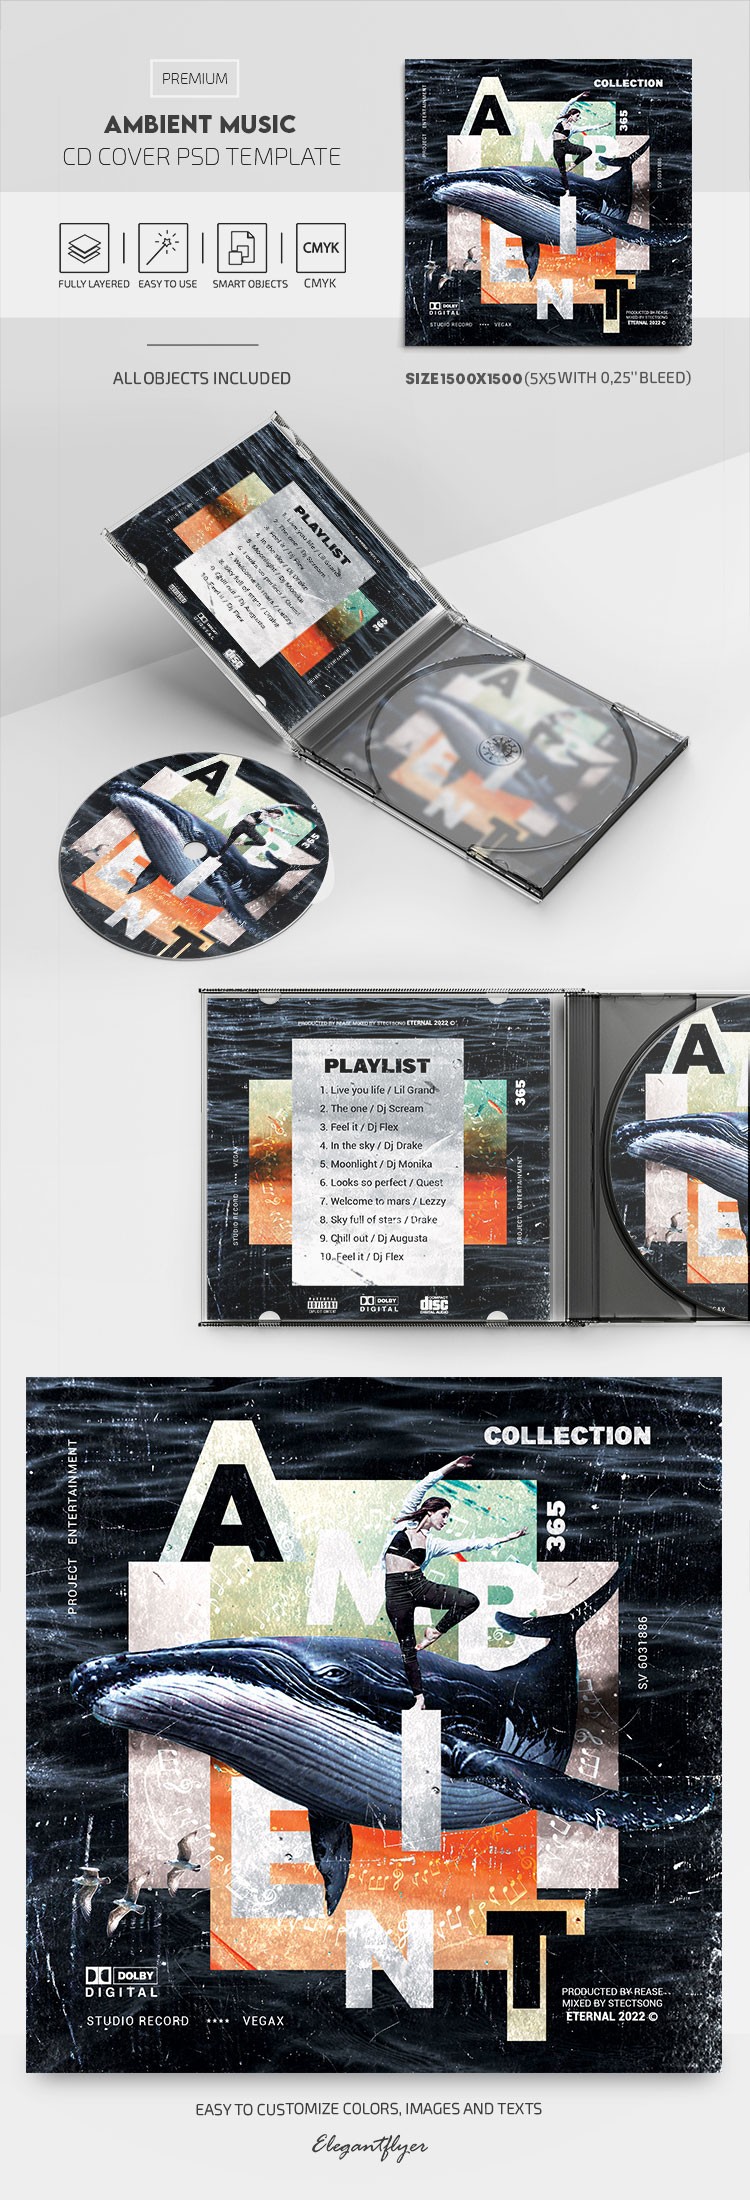 Ambient Music CD Cover by ElegantFlyer